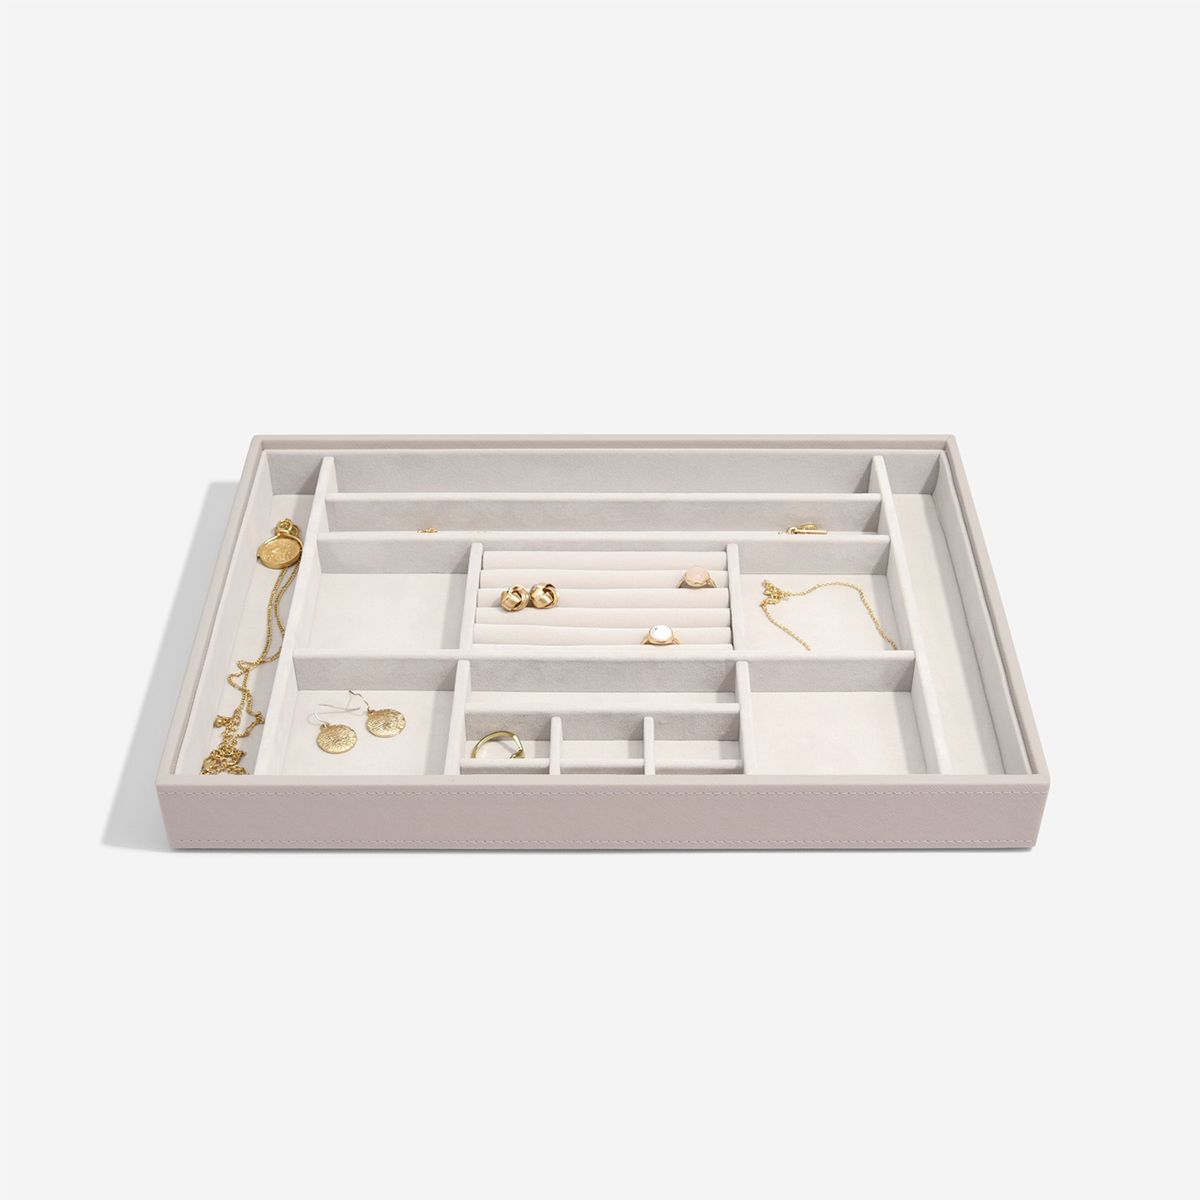 All-in-One Tray | The Container Store